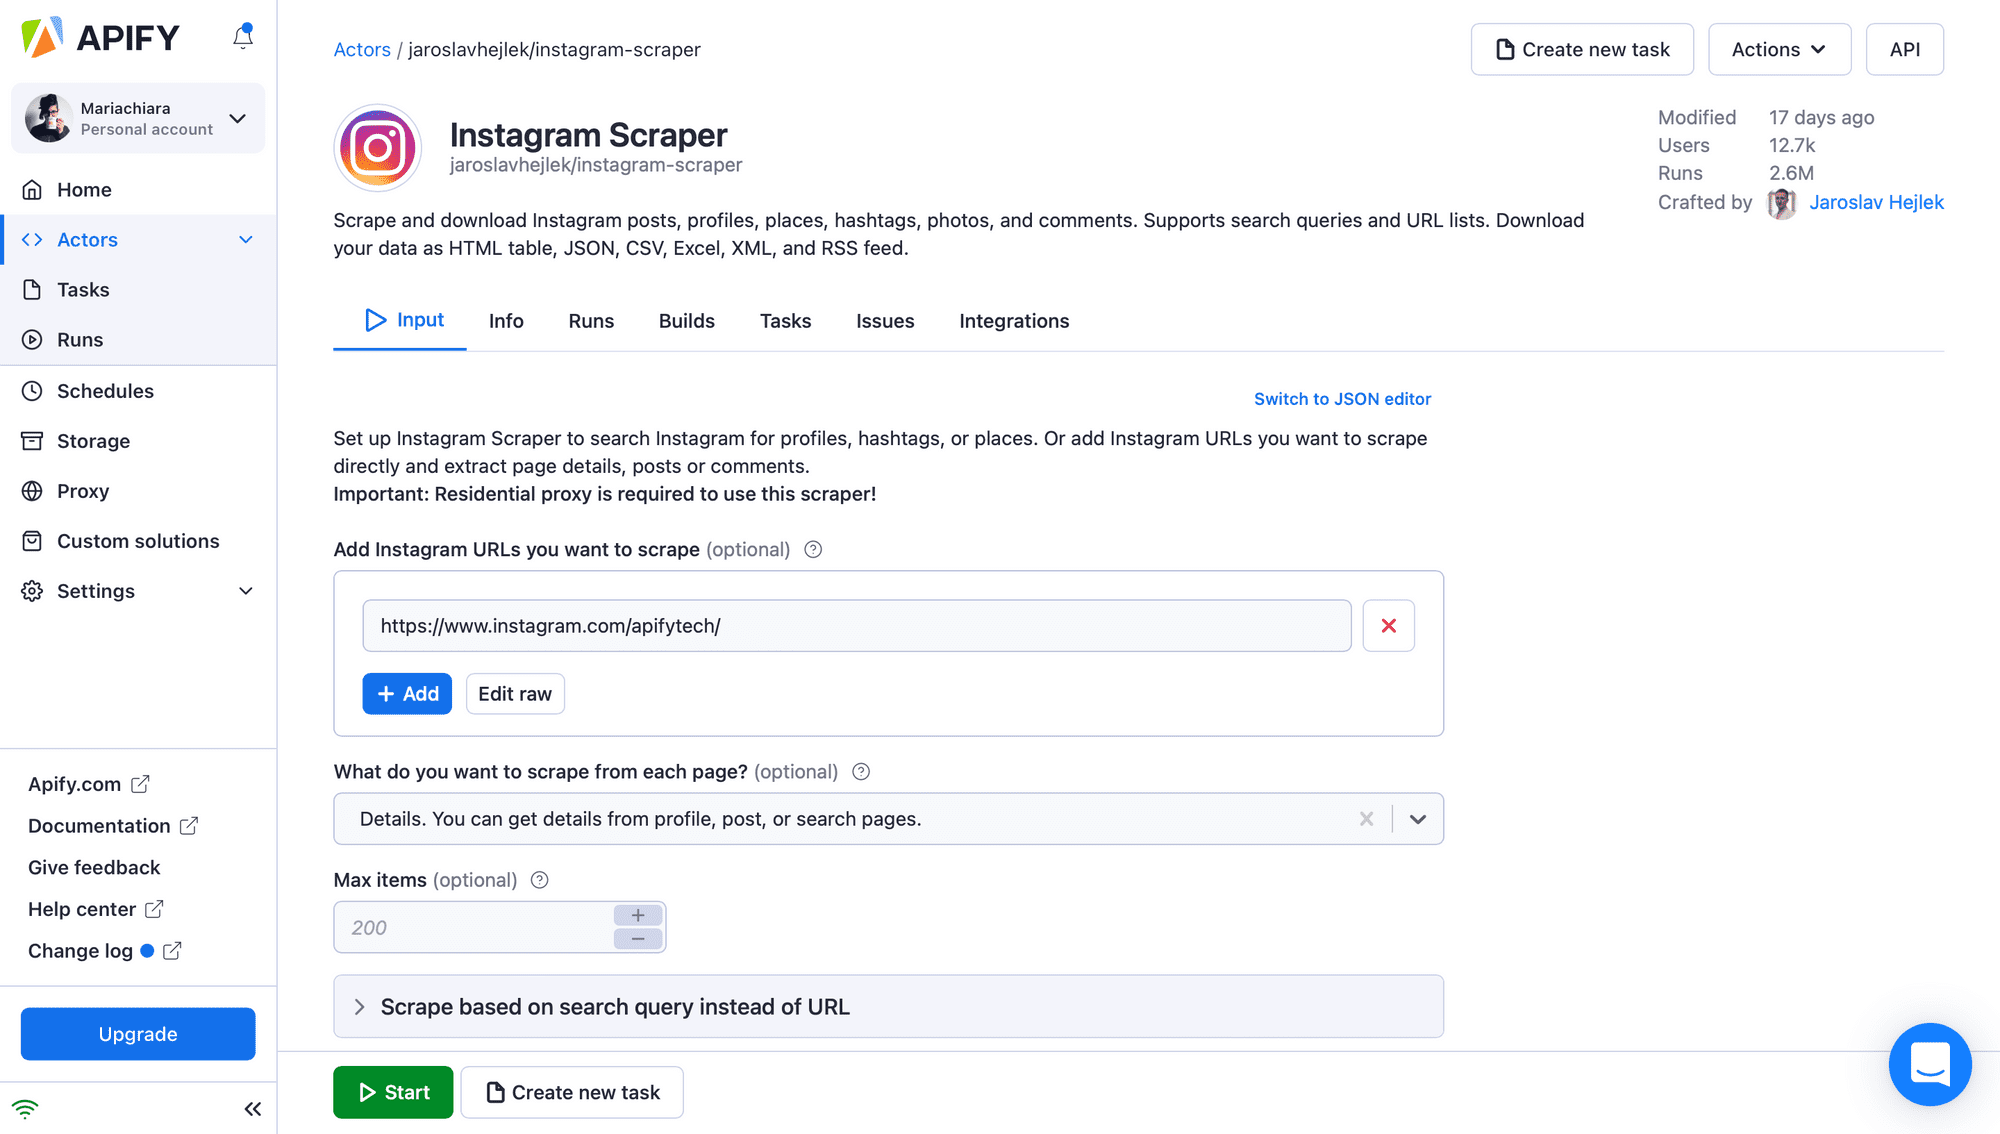 How to scrape Instagram Step 2. Insert your search query or URLs in the Input field